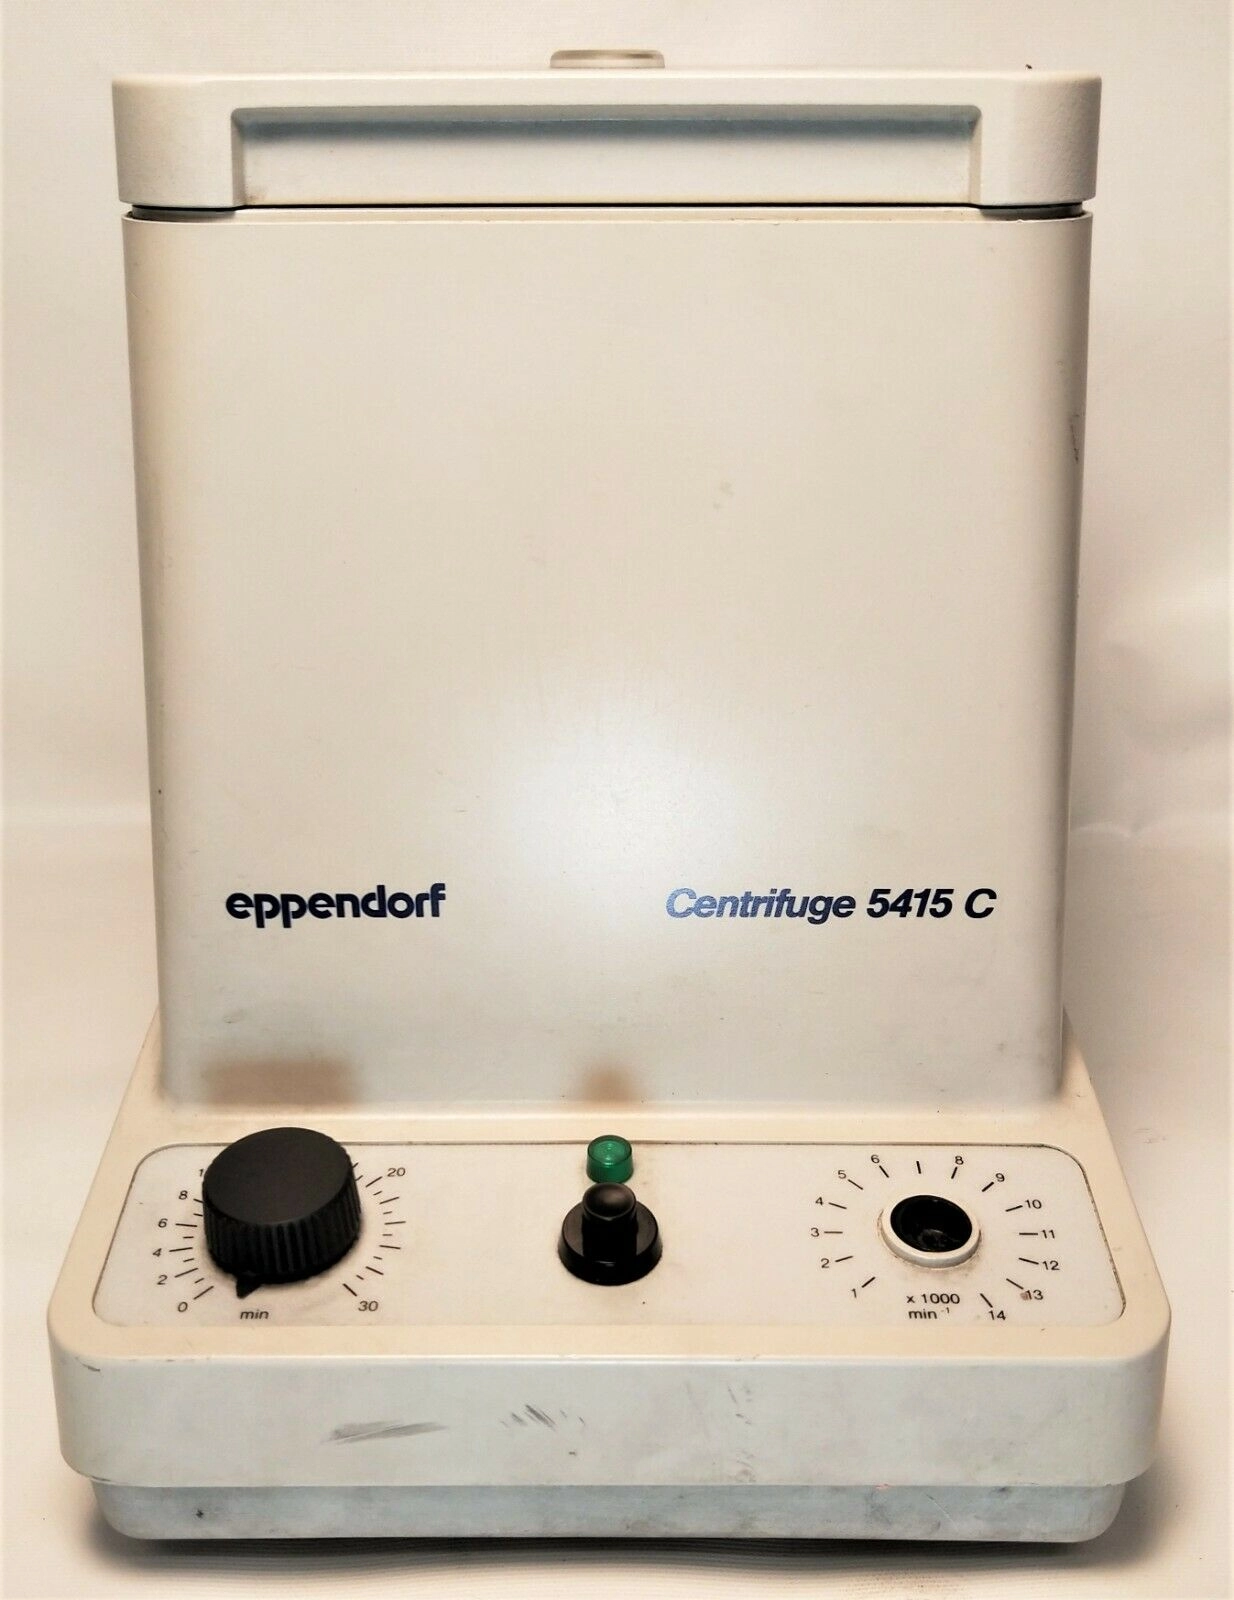 Eppendorf 5415C Microcentrifuge (18 x 1.5mL) SELLING AS-IS